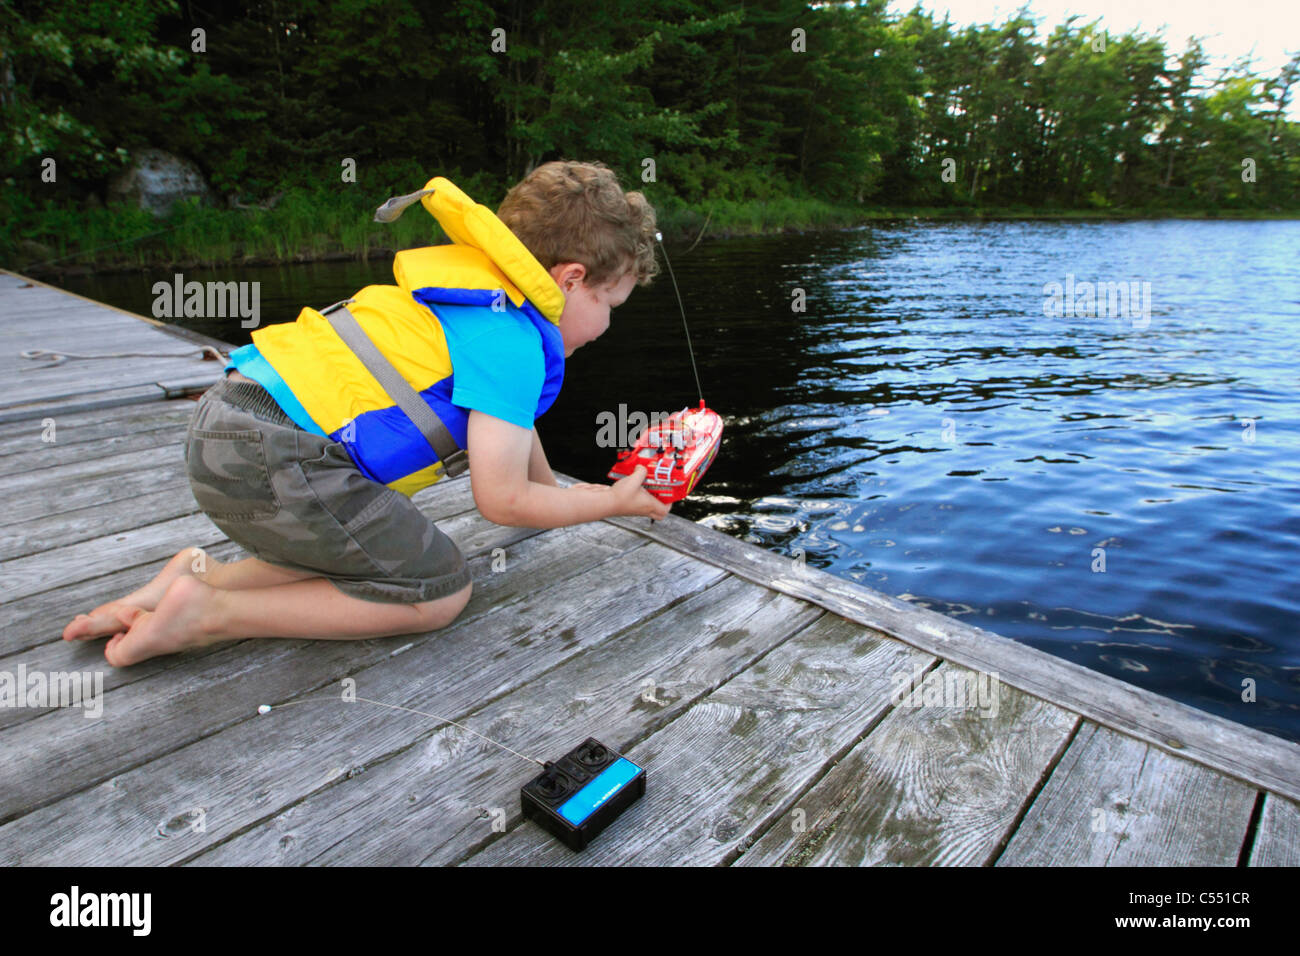 Boy playing with a remote controlled boat in a lake Stock Photo